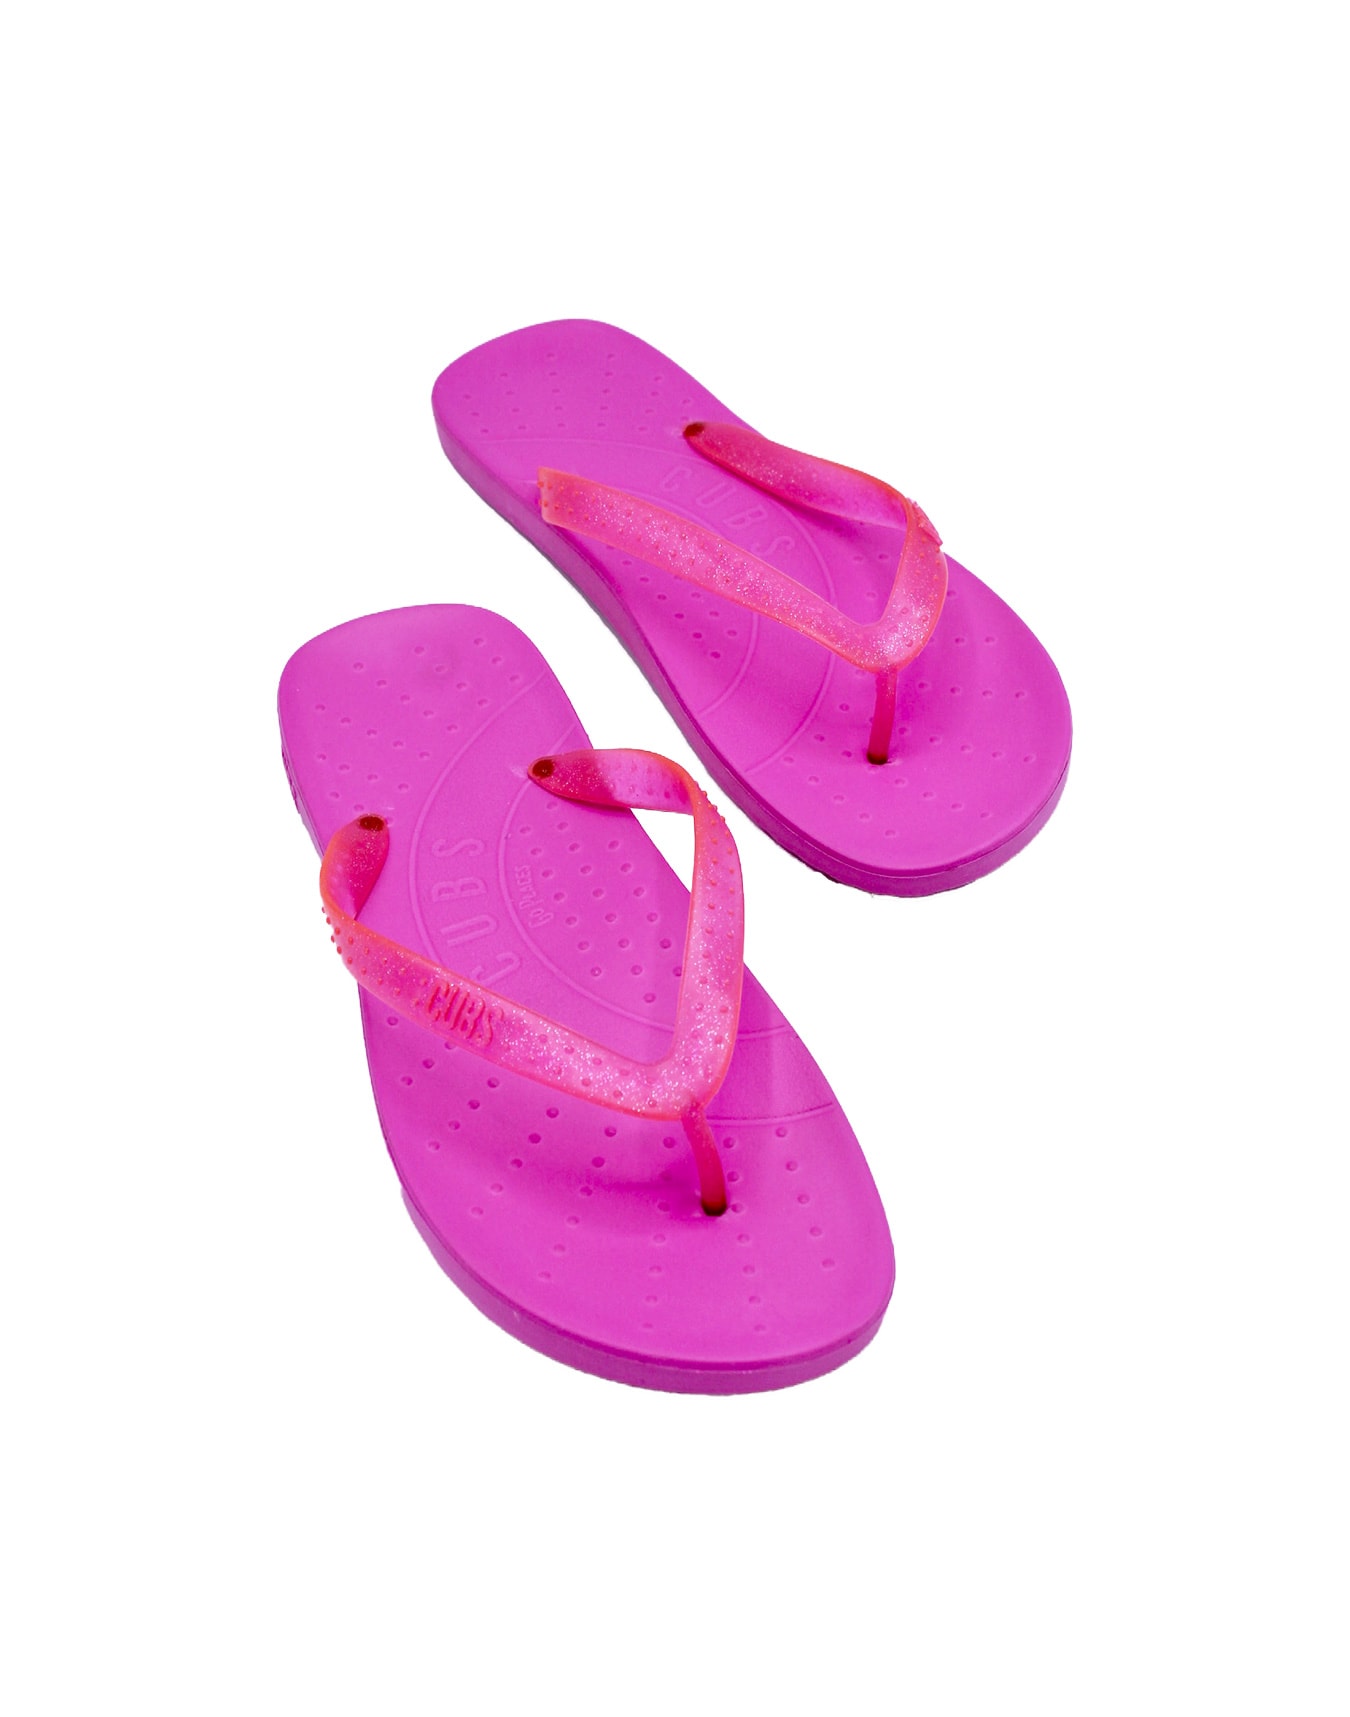 Bali Flip Flop Pink with Glitter Strap / Cubs Go Places